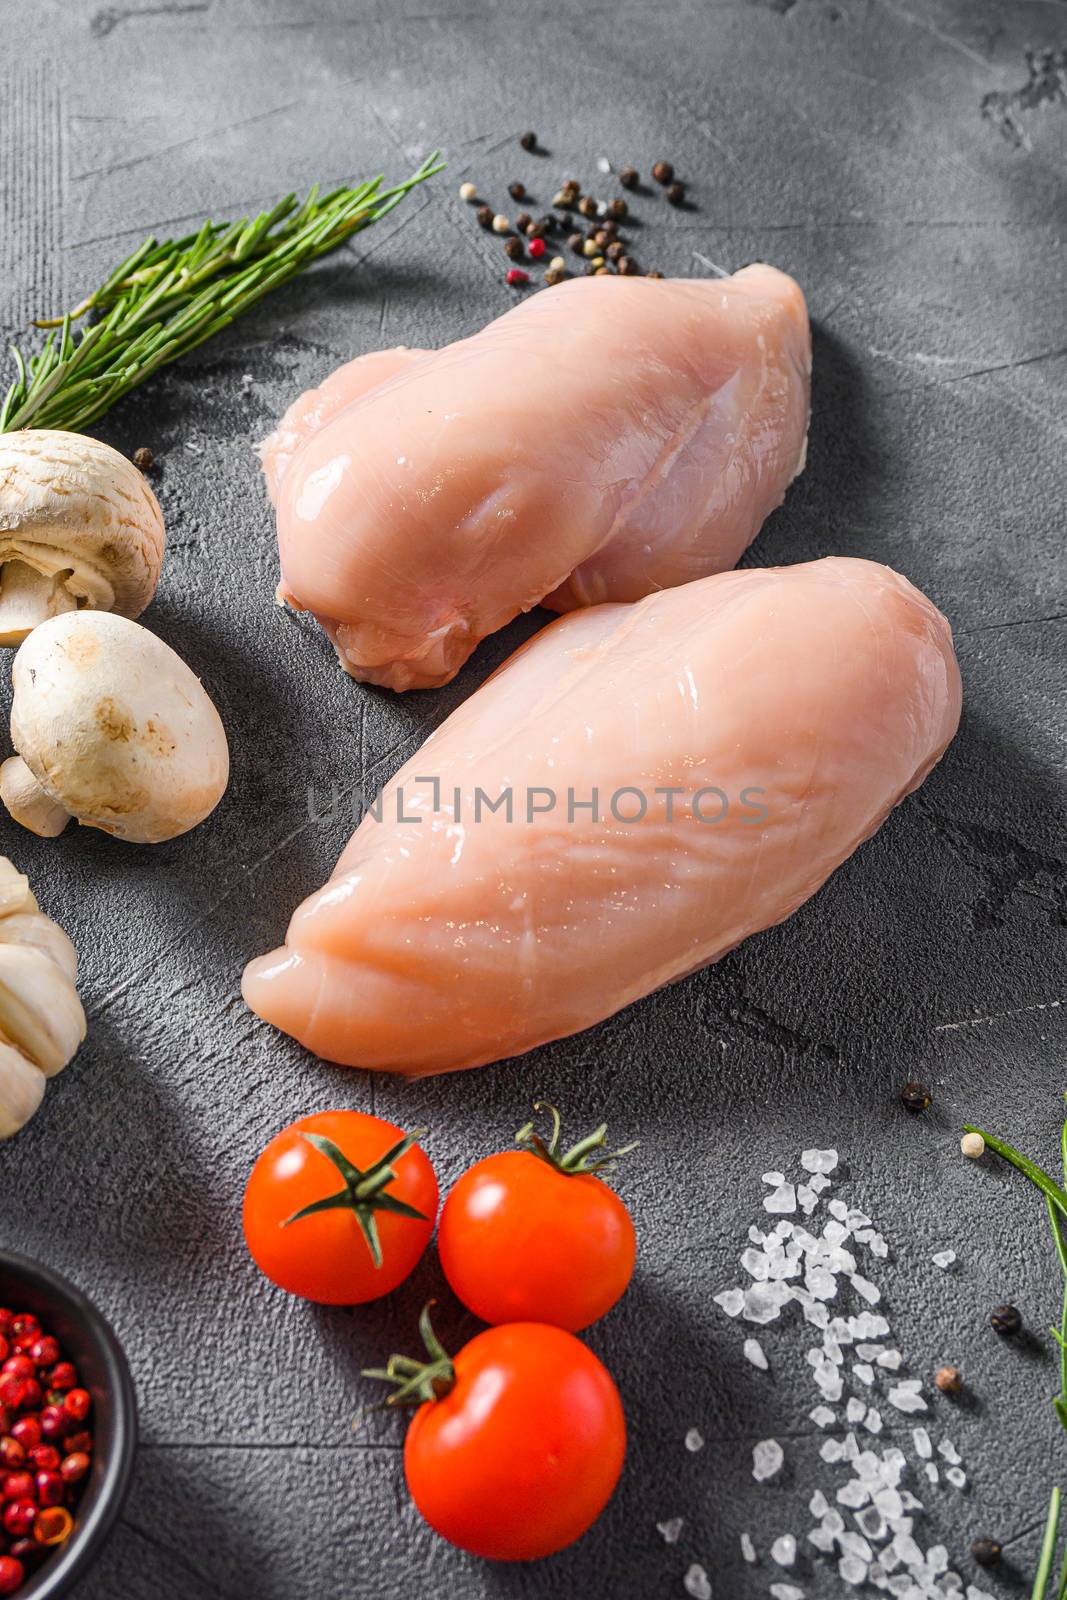 Raw chicken breast with fresh rosemary garlic, pepper and mushrooms on a grey concrete background side view. by Ilianesolenyi